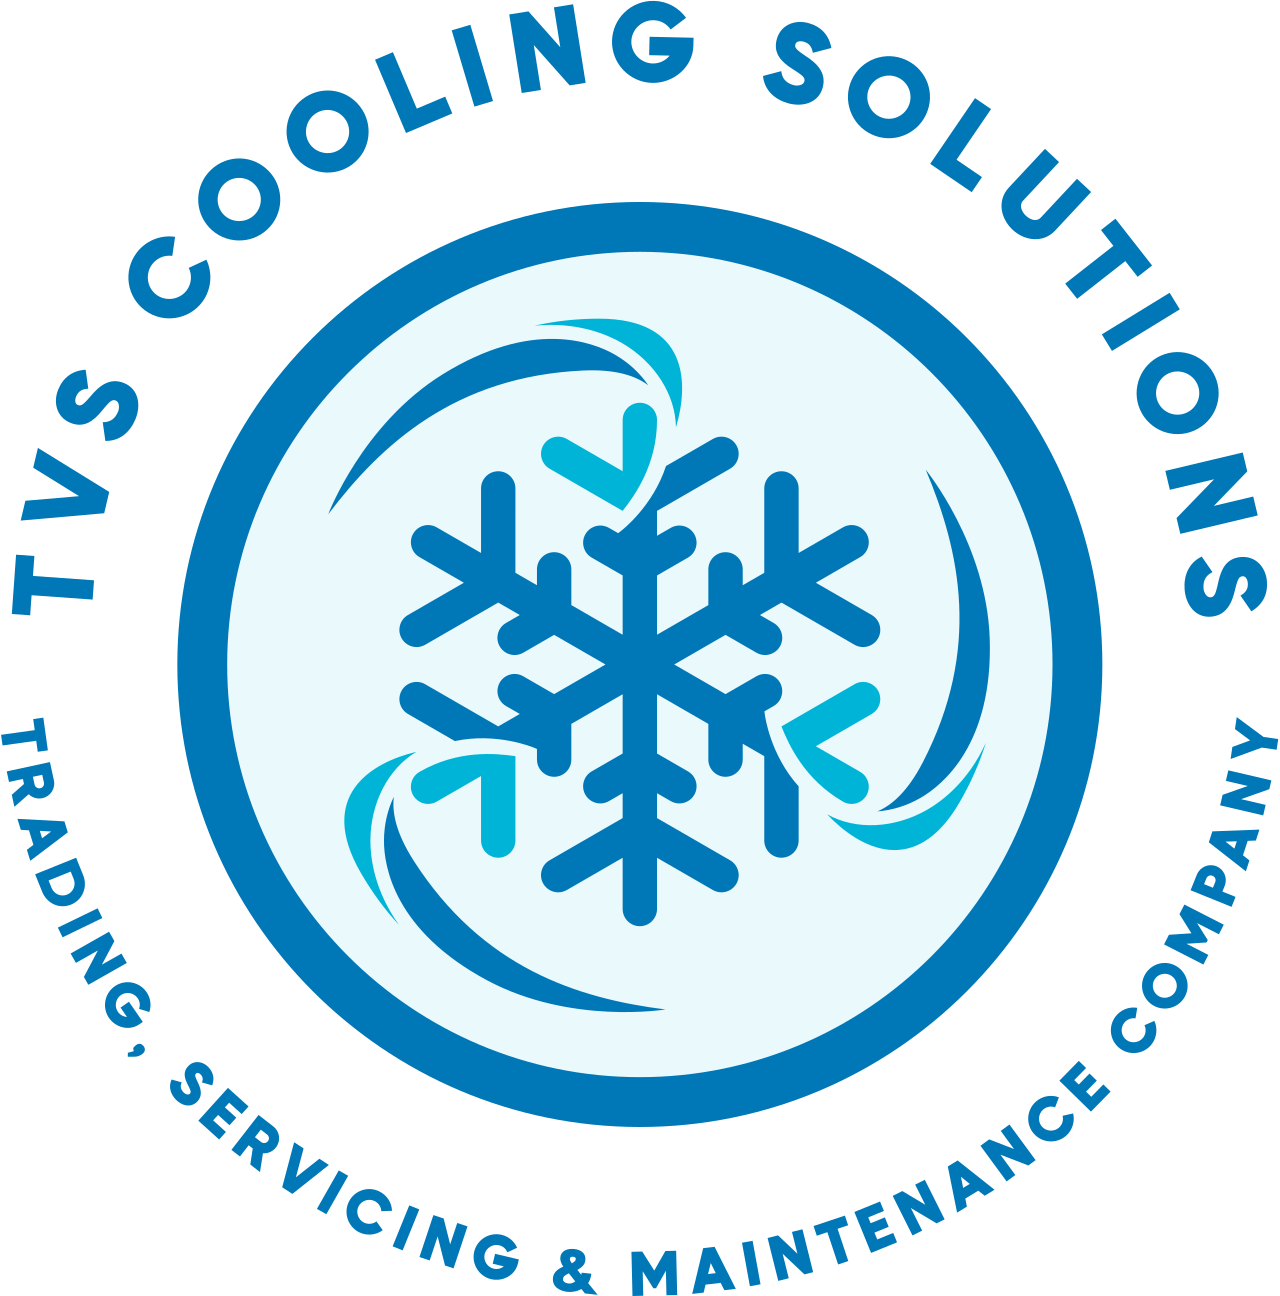 TVS Cooling Solutions's web page